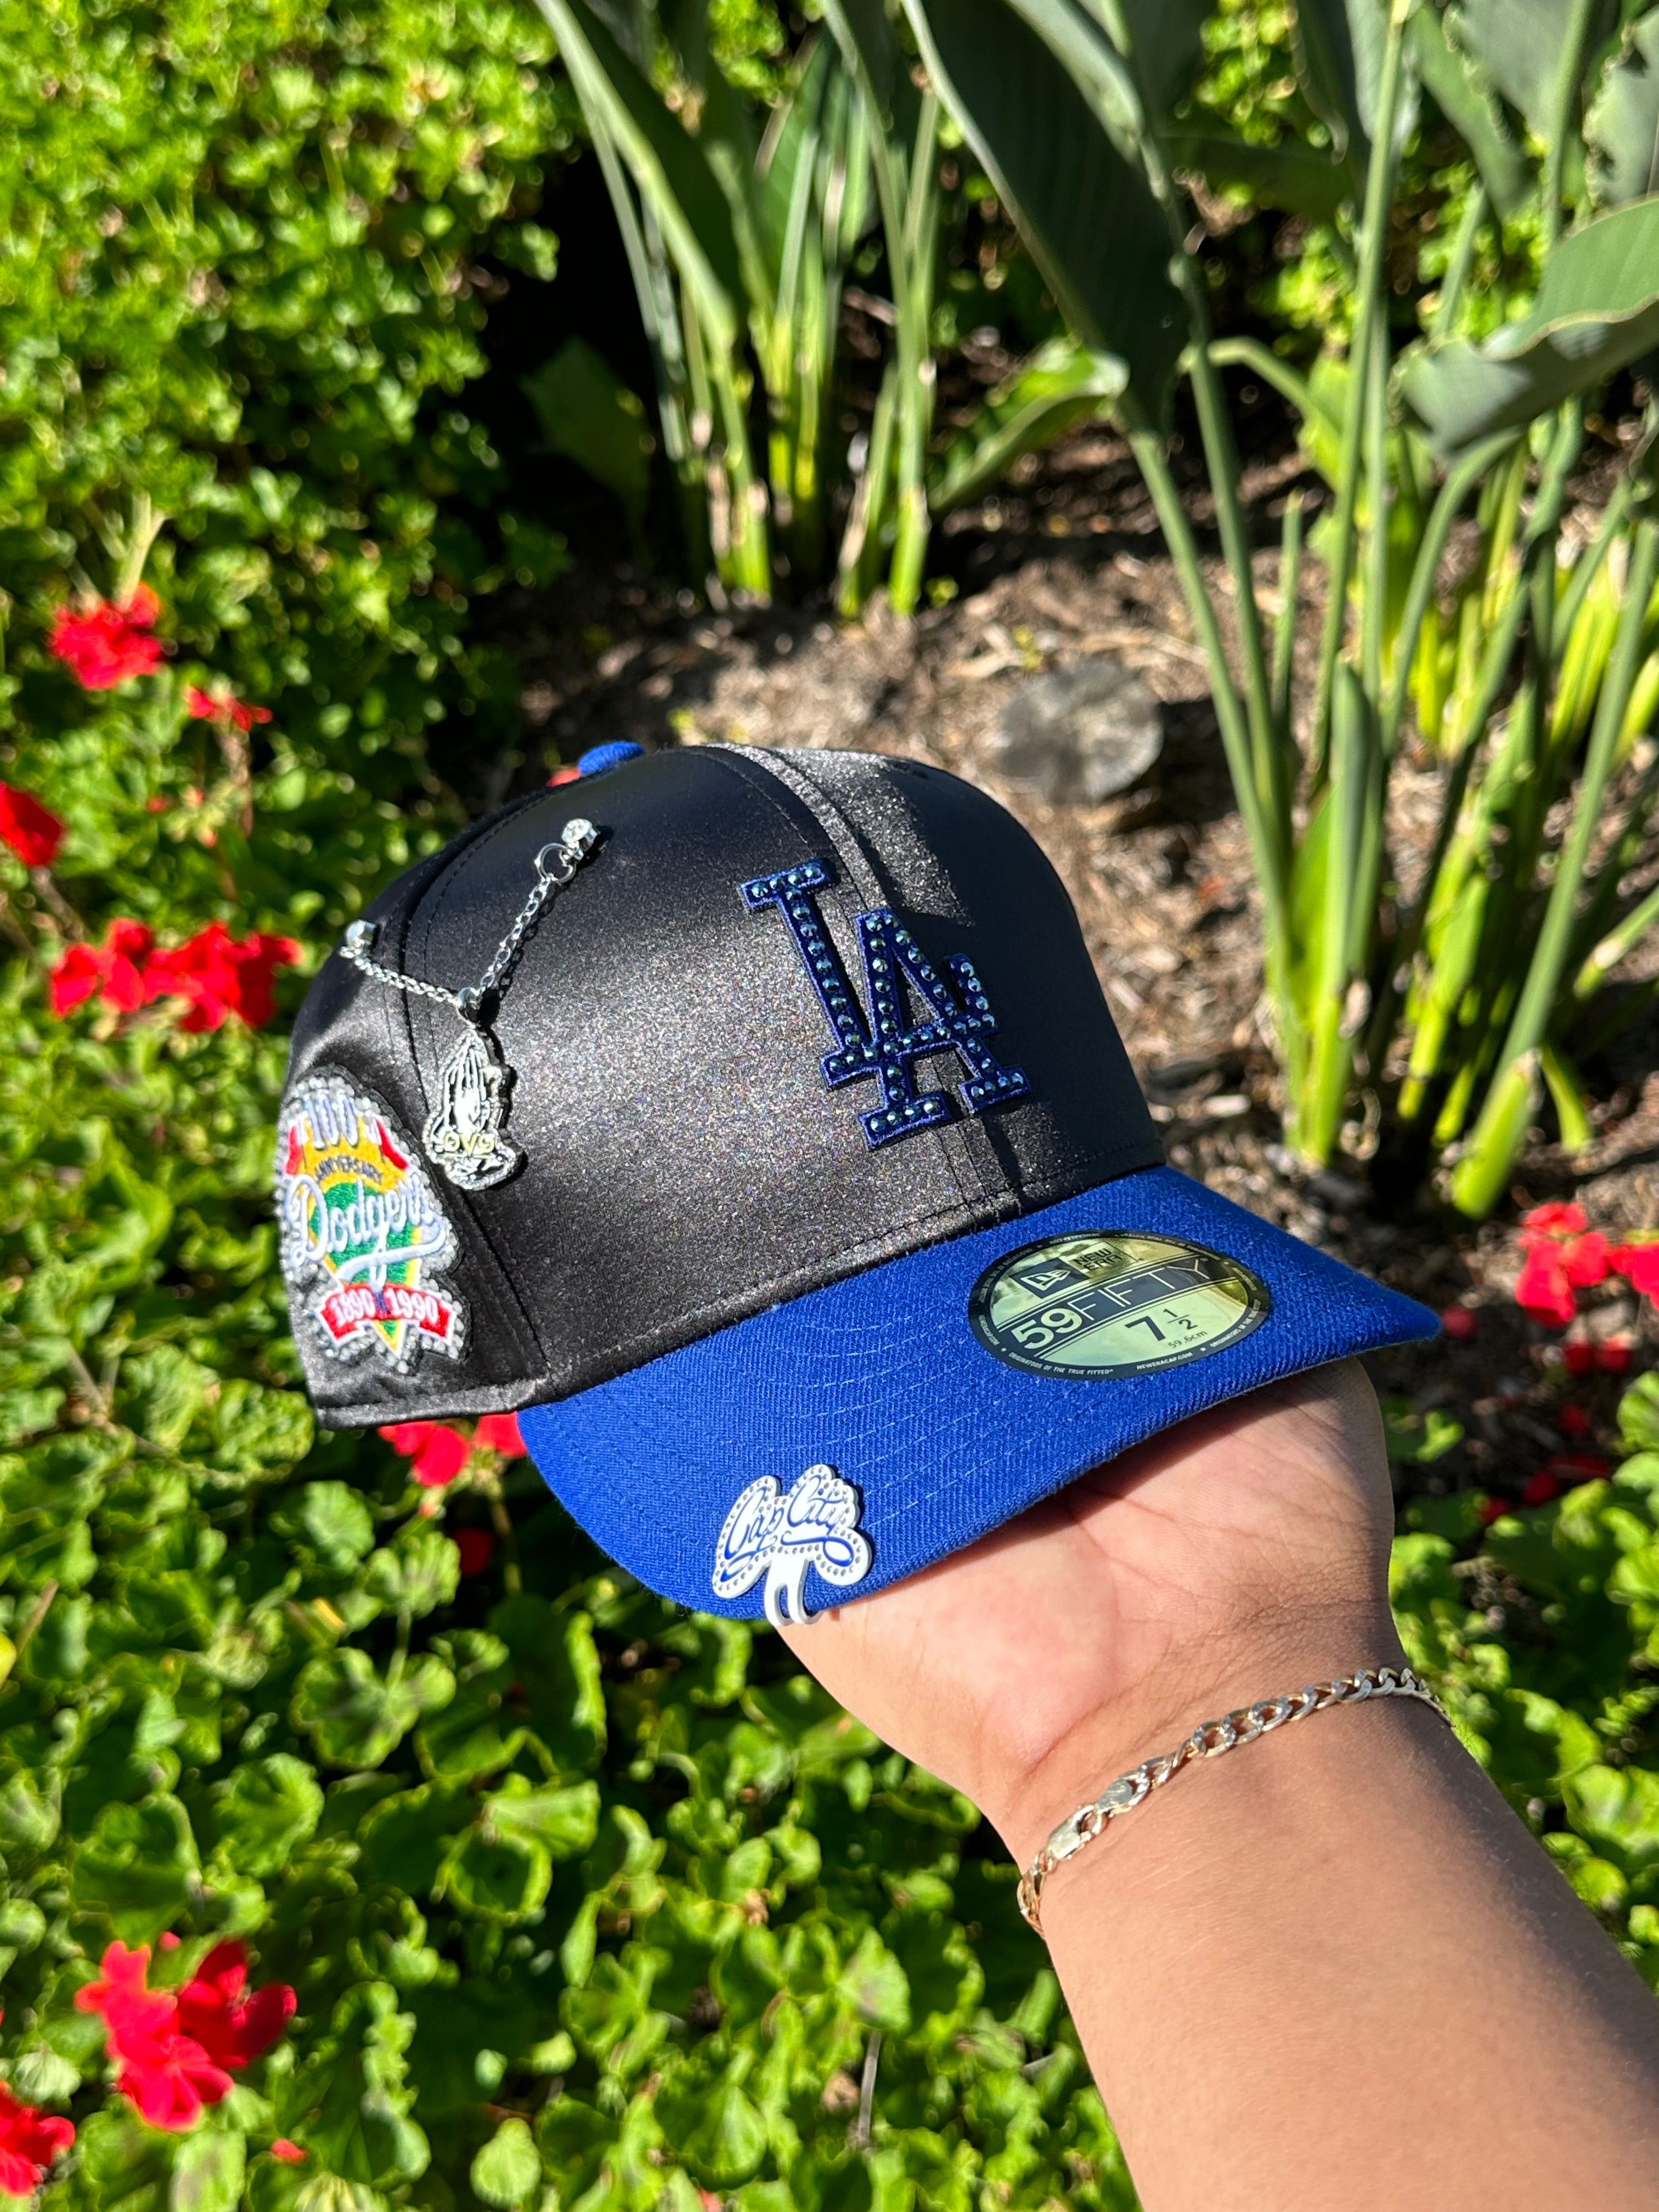 NEW ERA EXCLUSIVE 59FIFTY SATIN/BLUE LOS ANGELES DODGERS W/ 100TH ANNIVERSARY SIDEPATCH